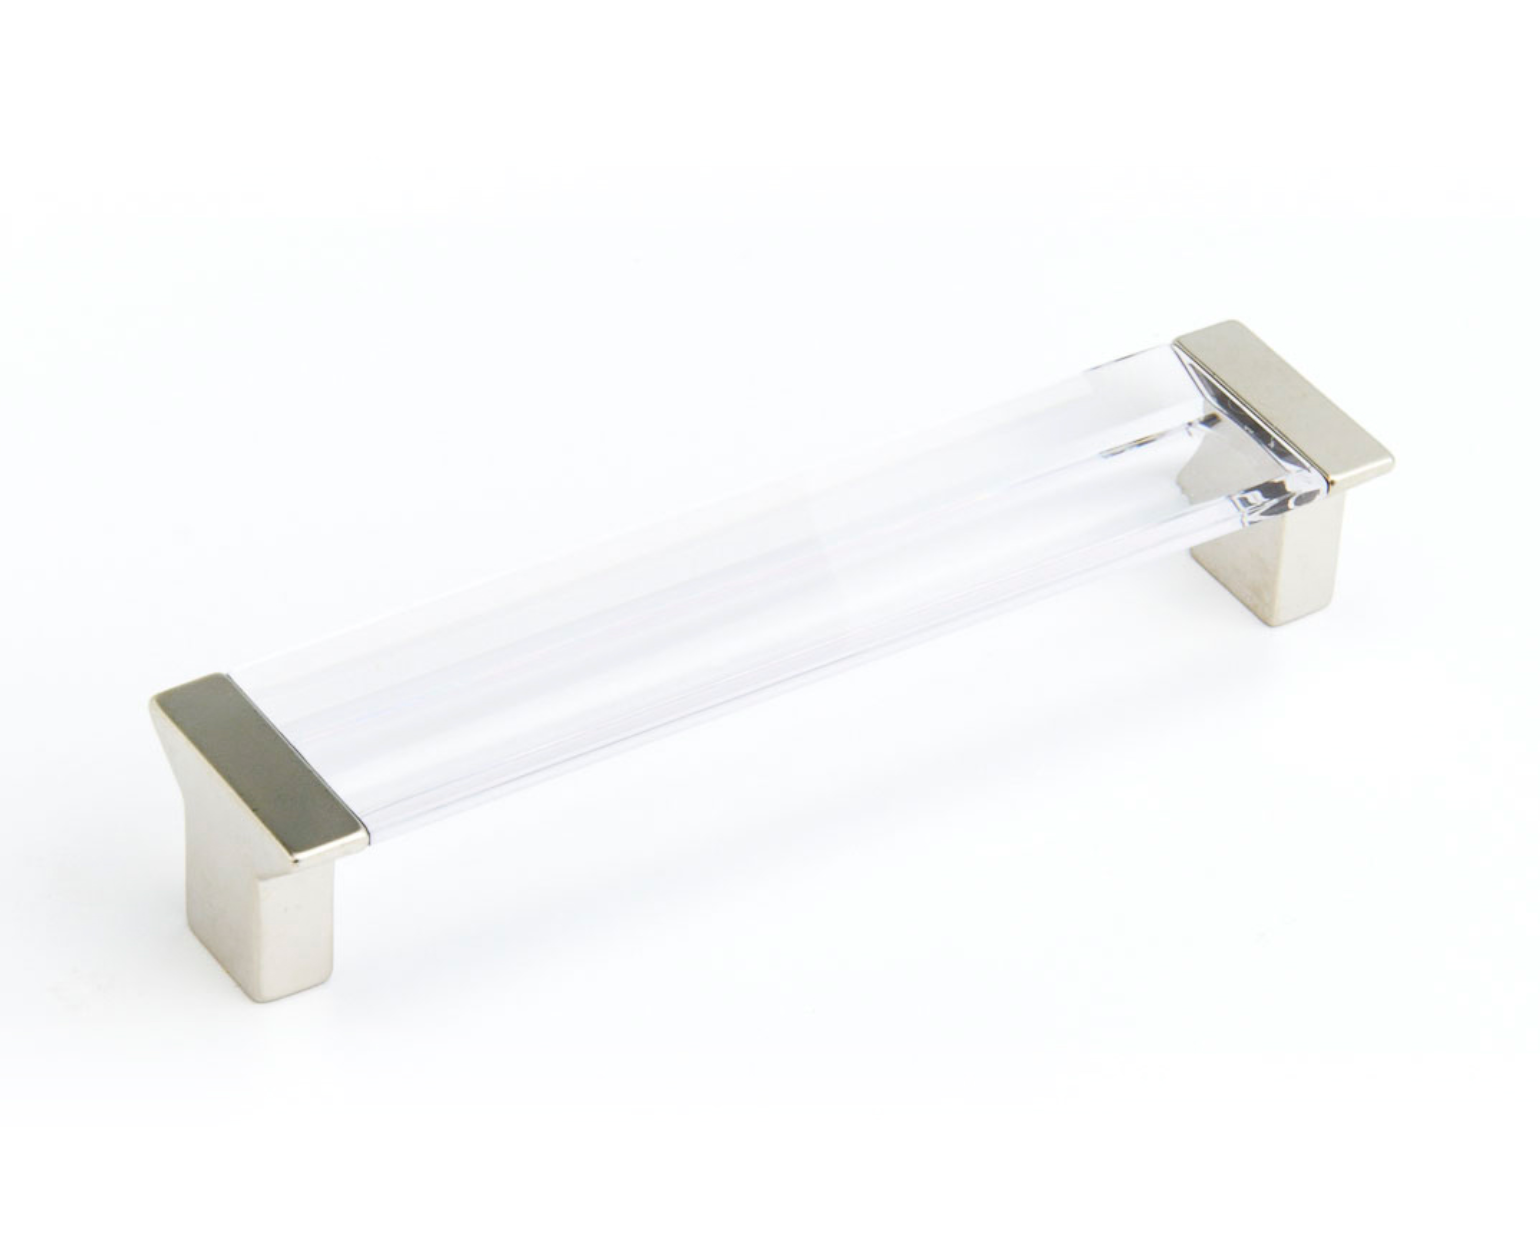 Satin Nickel "Ponce" Clear Glass Cabinet Knob and Drawer Pulls - Industry Hardware